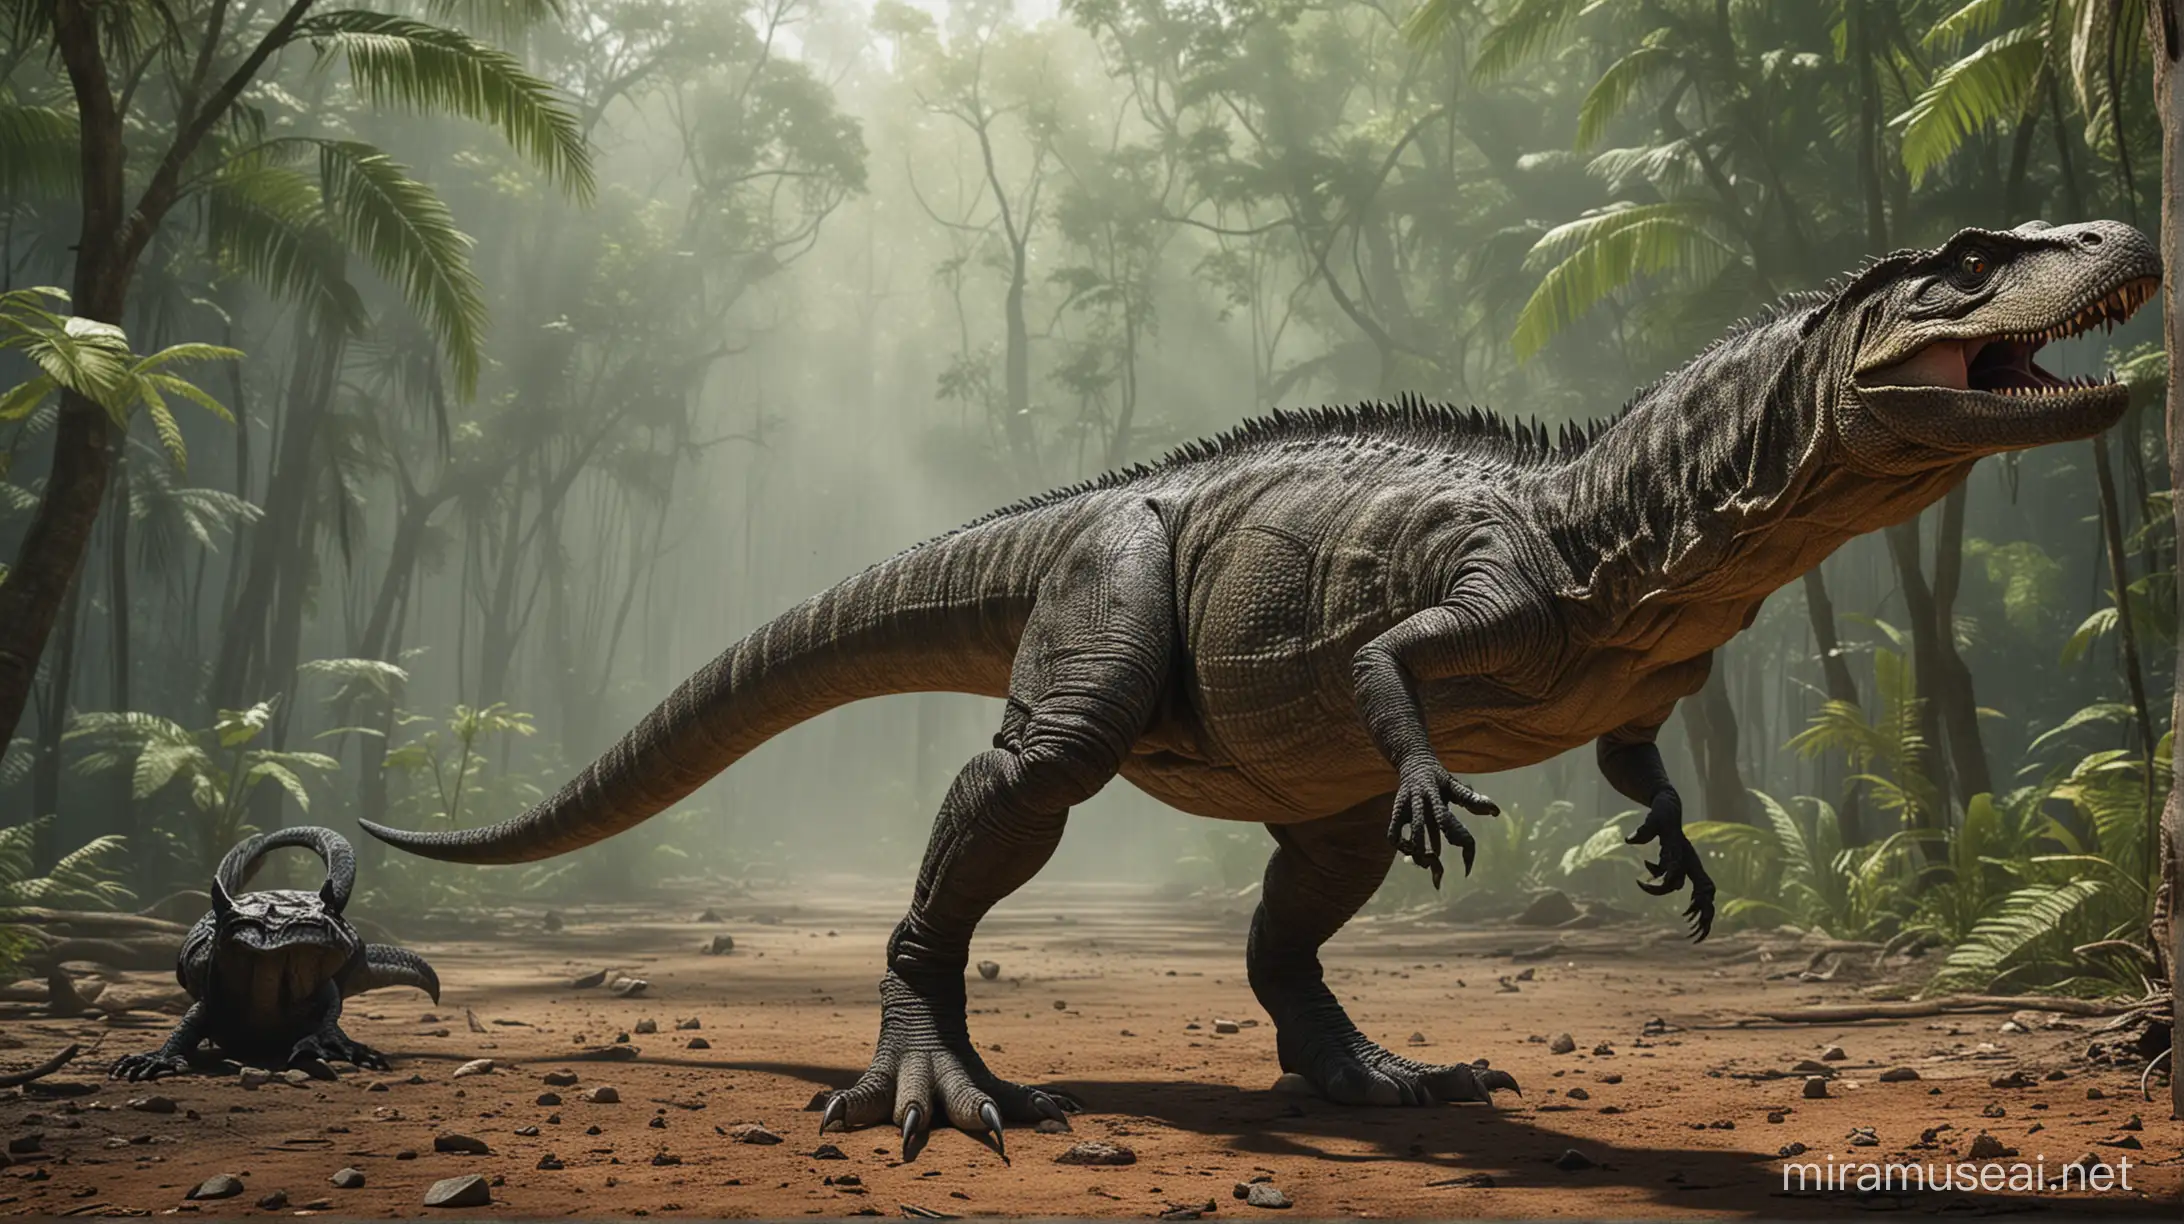 t-rex evolved from monitor lizards